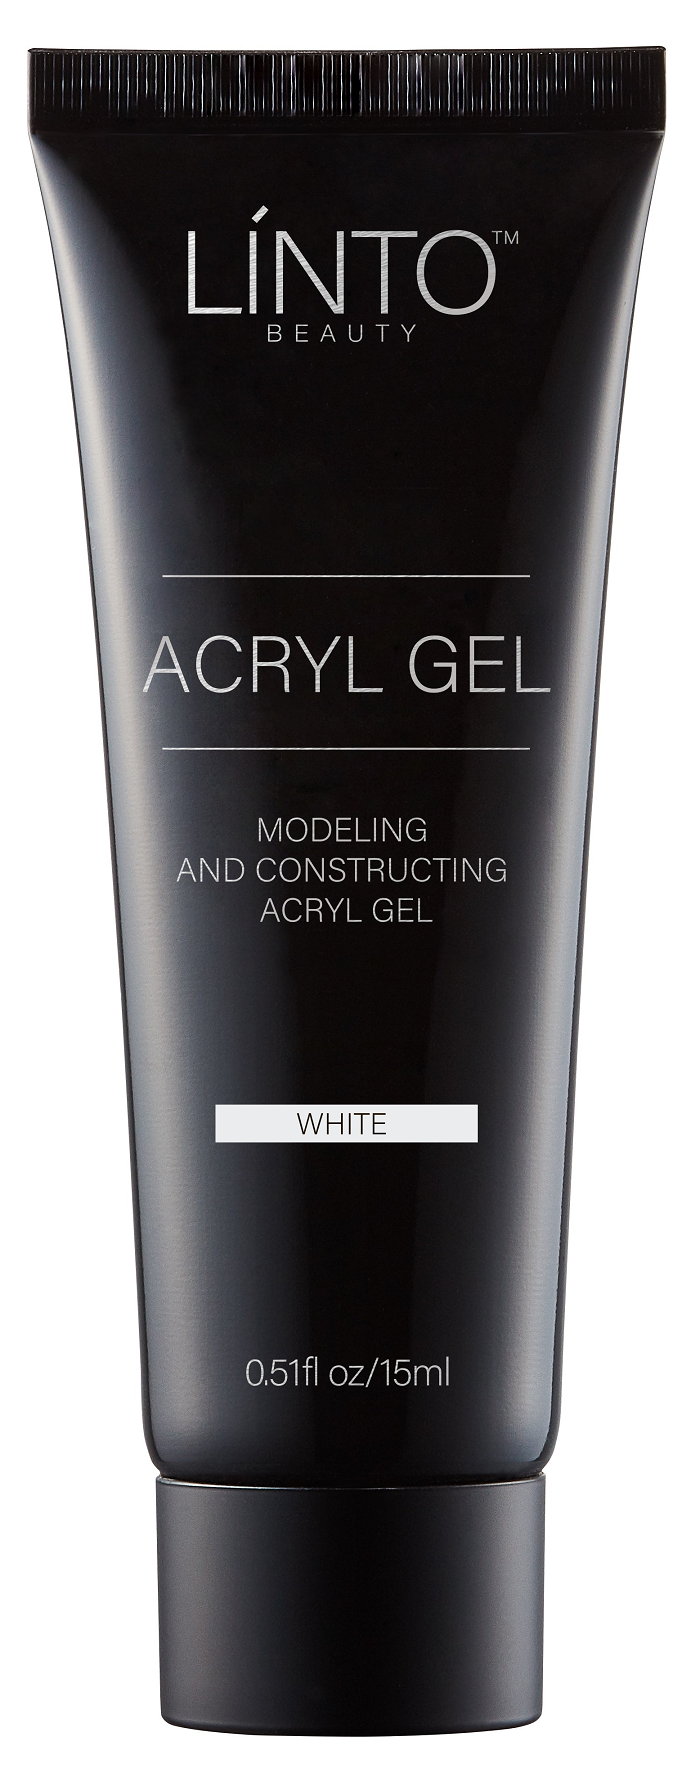 Acryl gel white by LiNTO